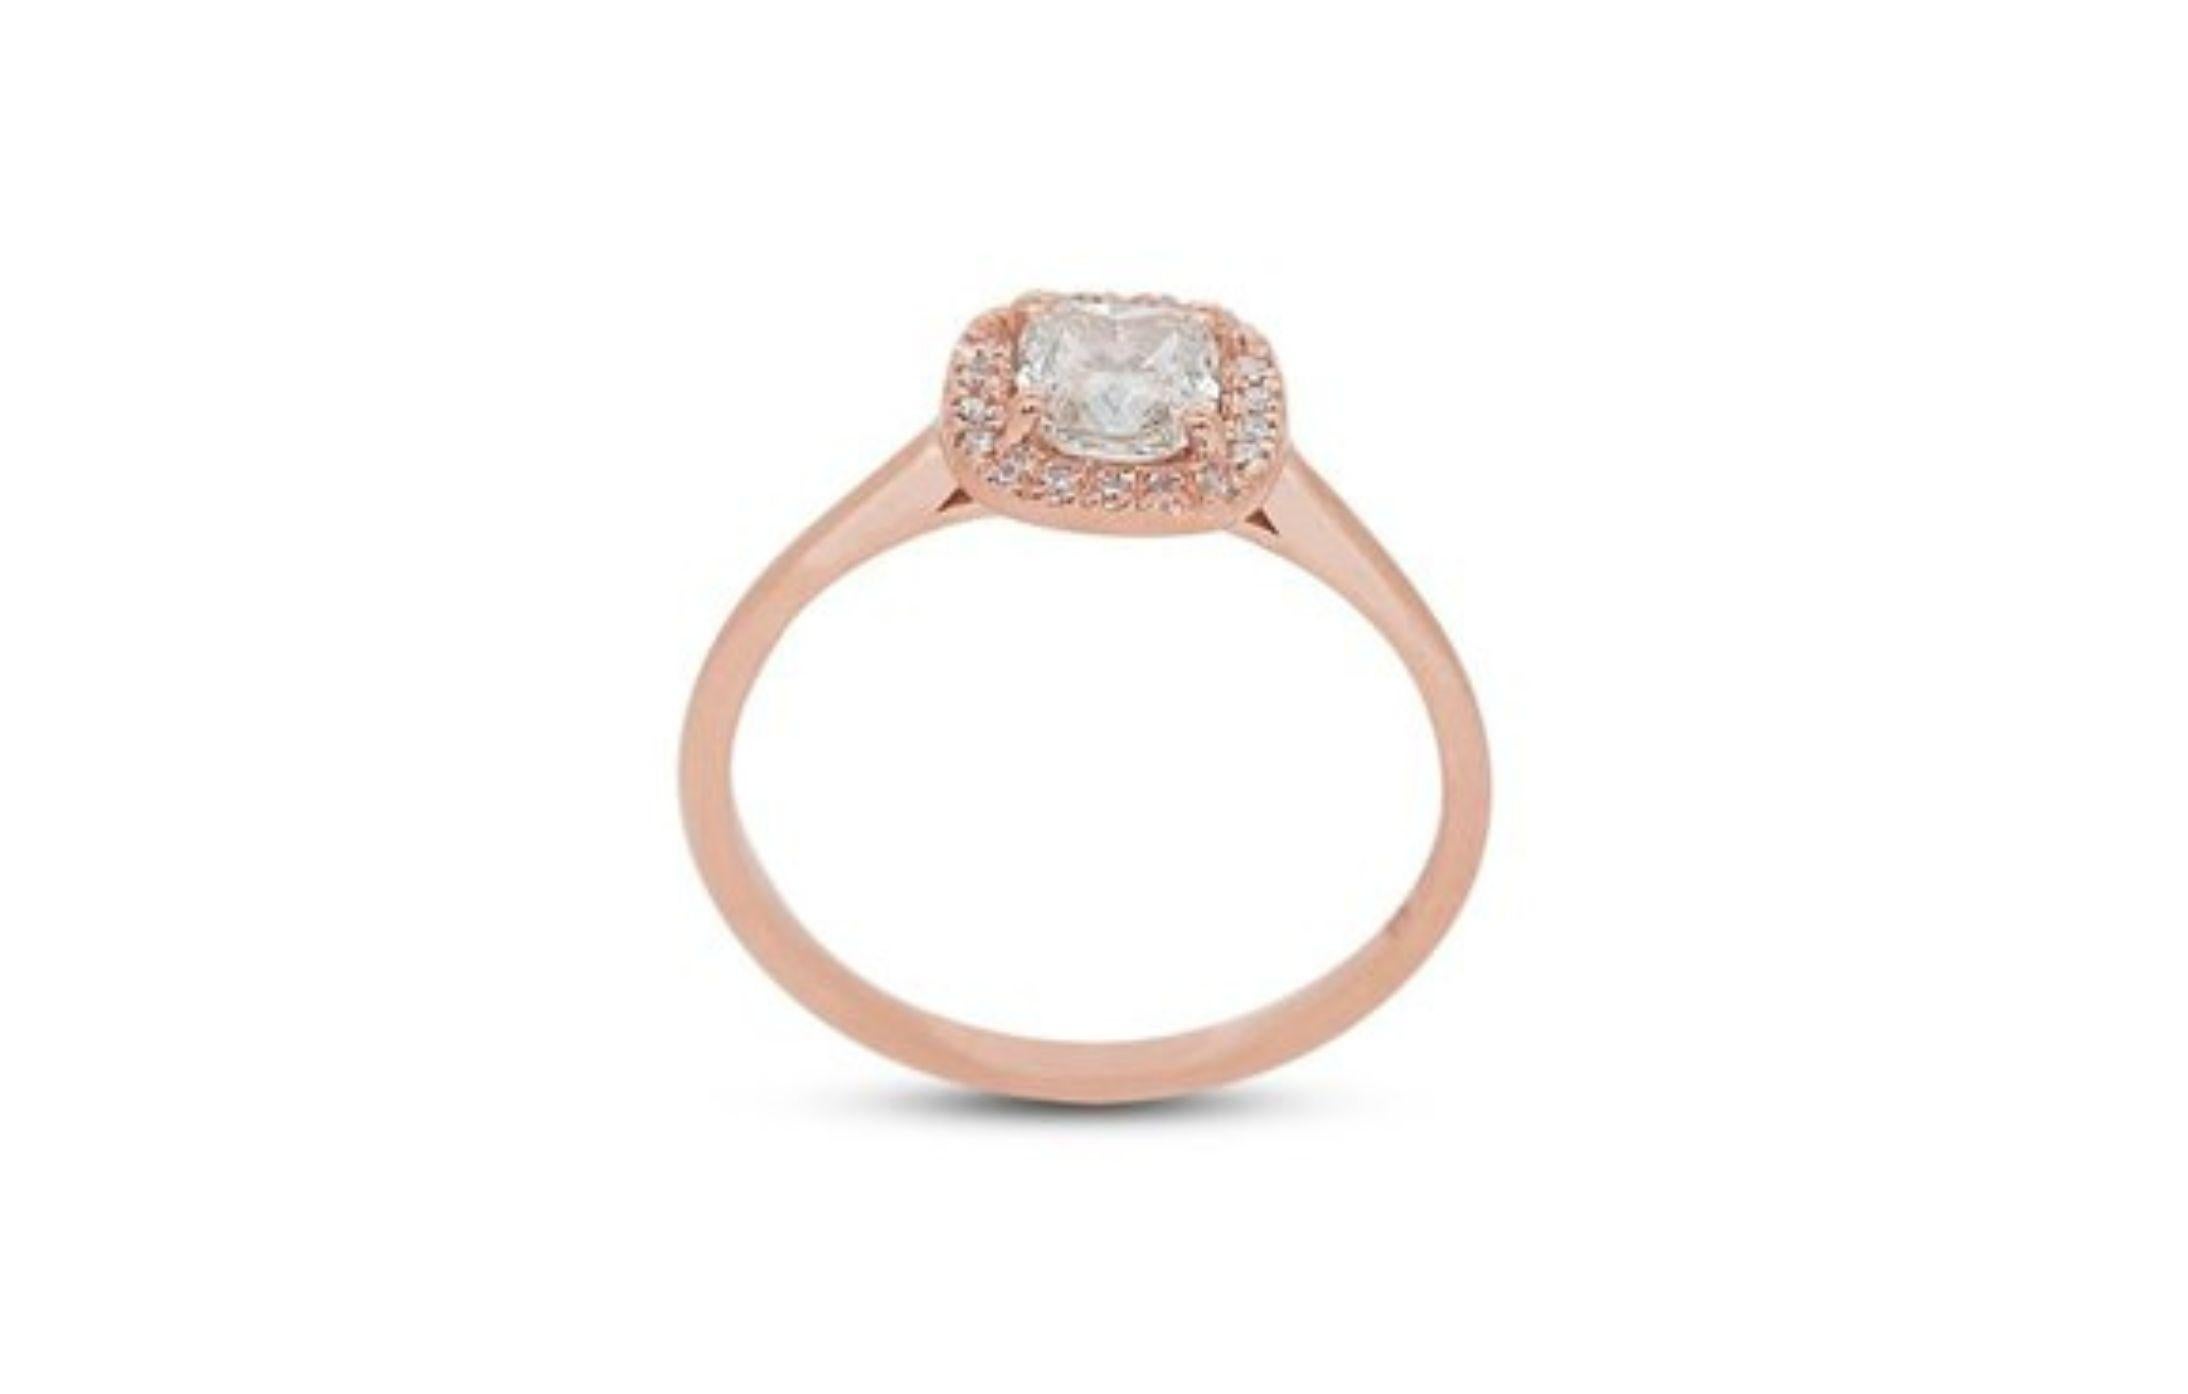 Women's Romantic  1 Carat Cushion Diamond Ring with Dazzling Side Stones in 18K Pink Gol For Sale